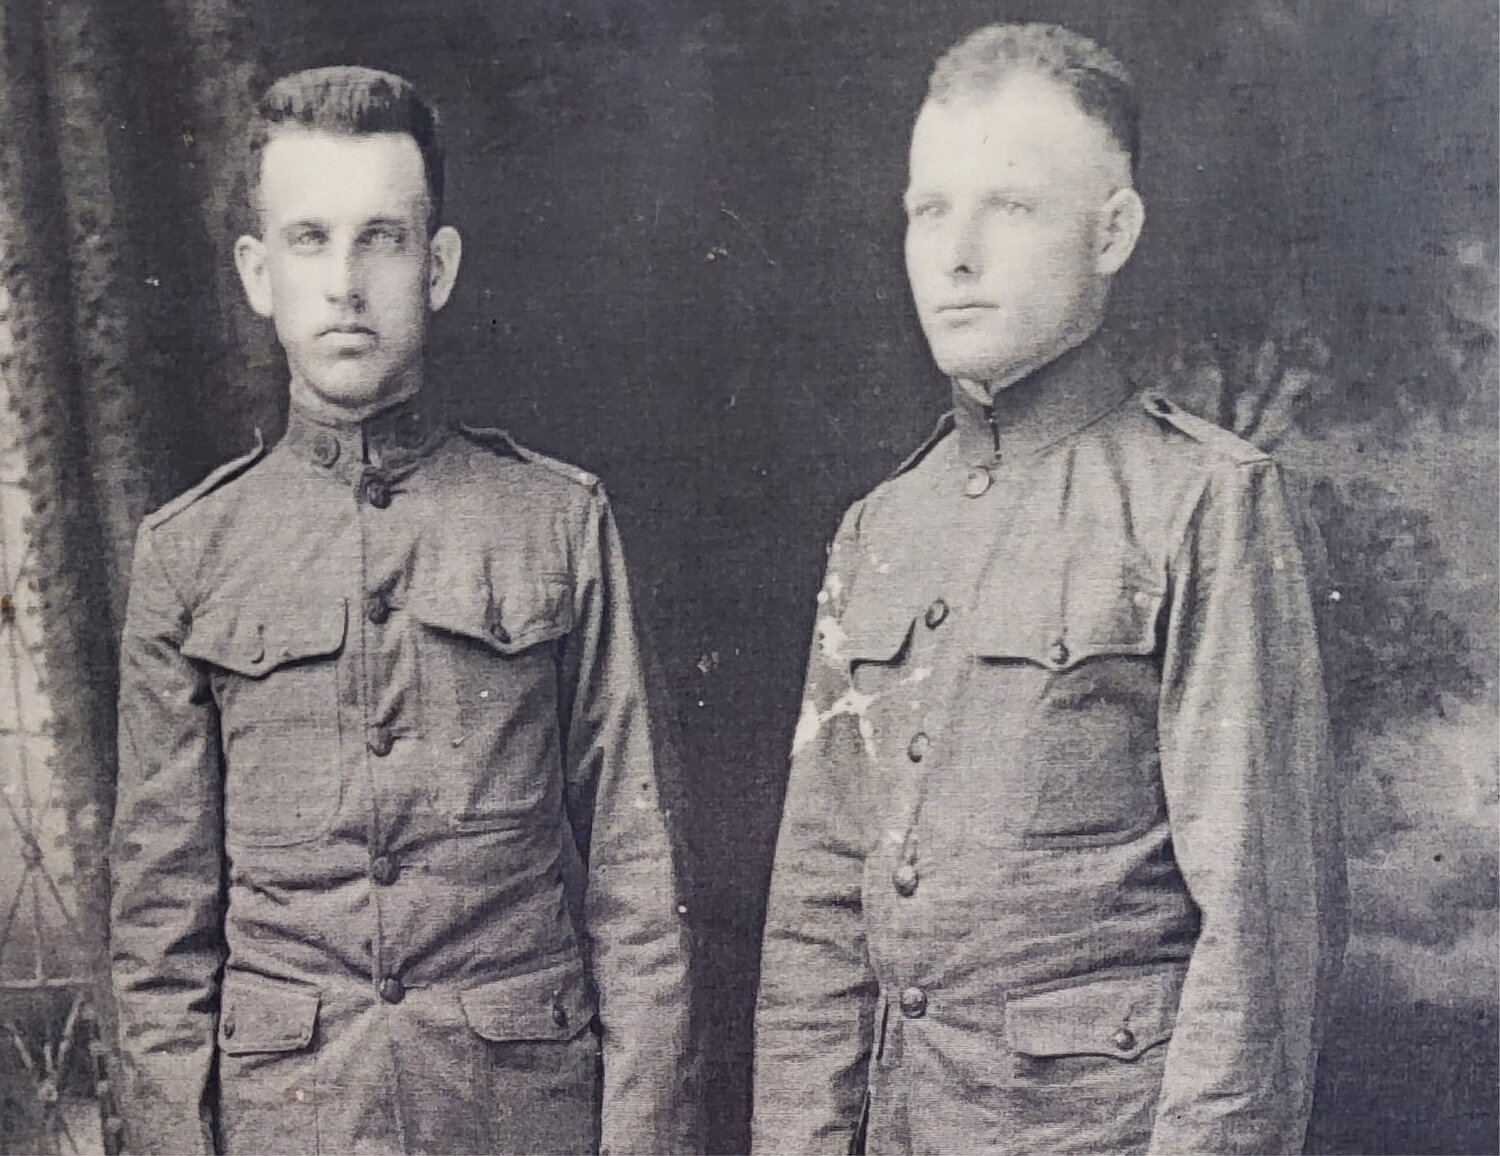 American Legion Post #99 was named after William Clayton Hennessee (left) and Joe Baker (right). Both were shot and died from their wounds in the Argonne Forest Battle, in France, during World War I. Both men are buried in France.